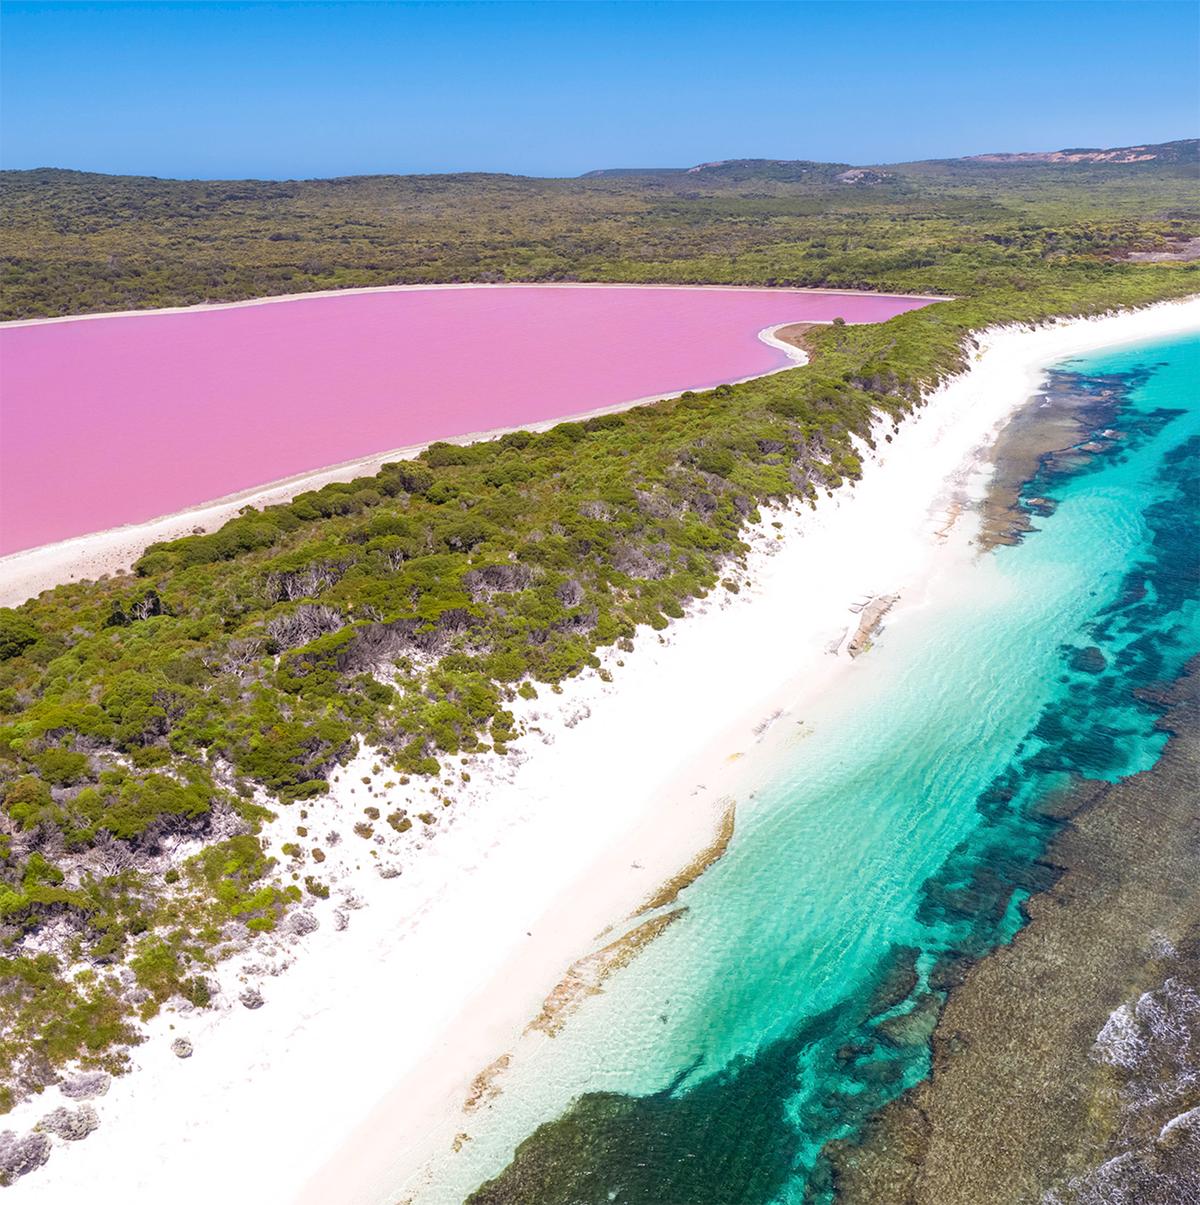 Pink Lake Hillier. (Caters News)